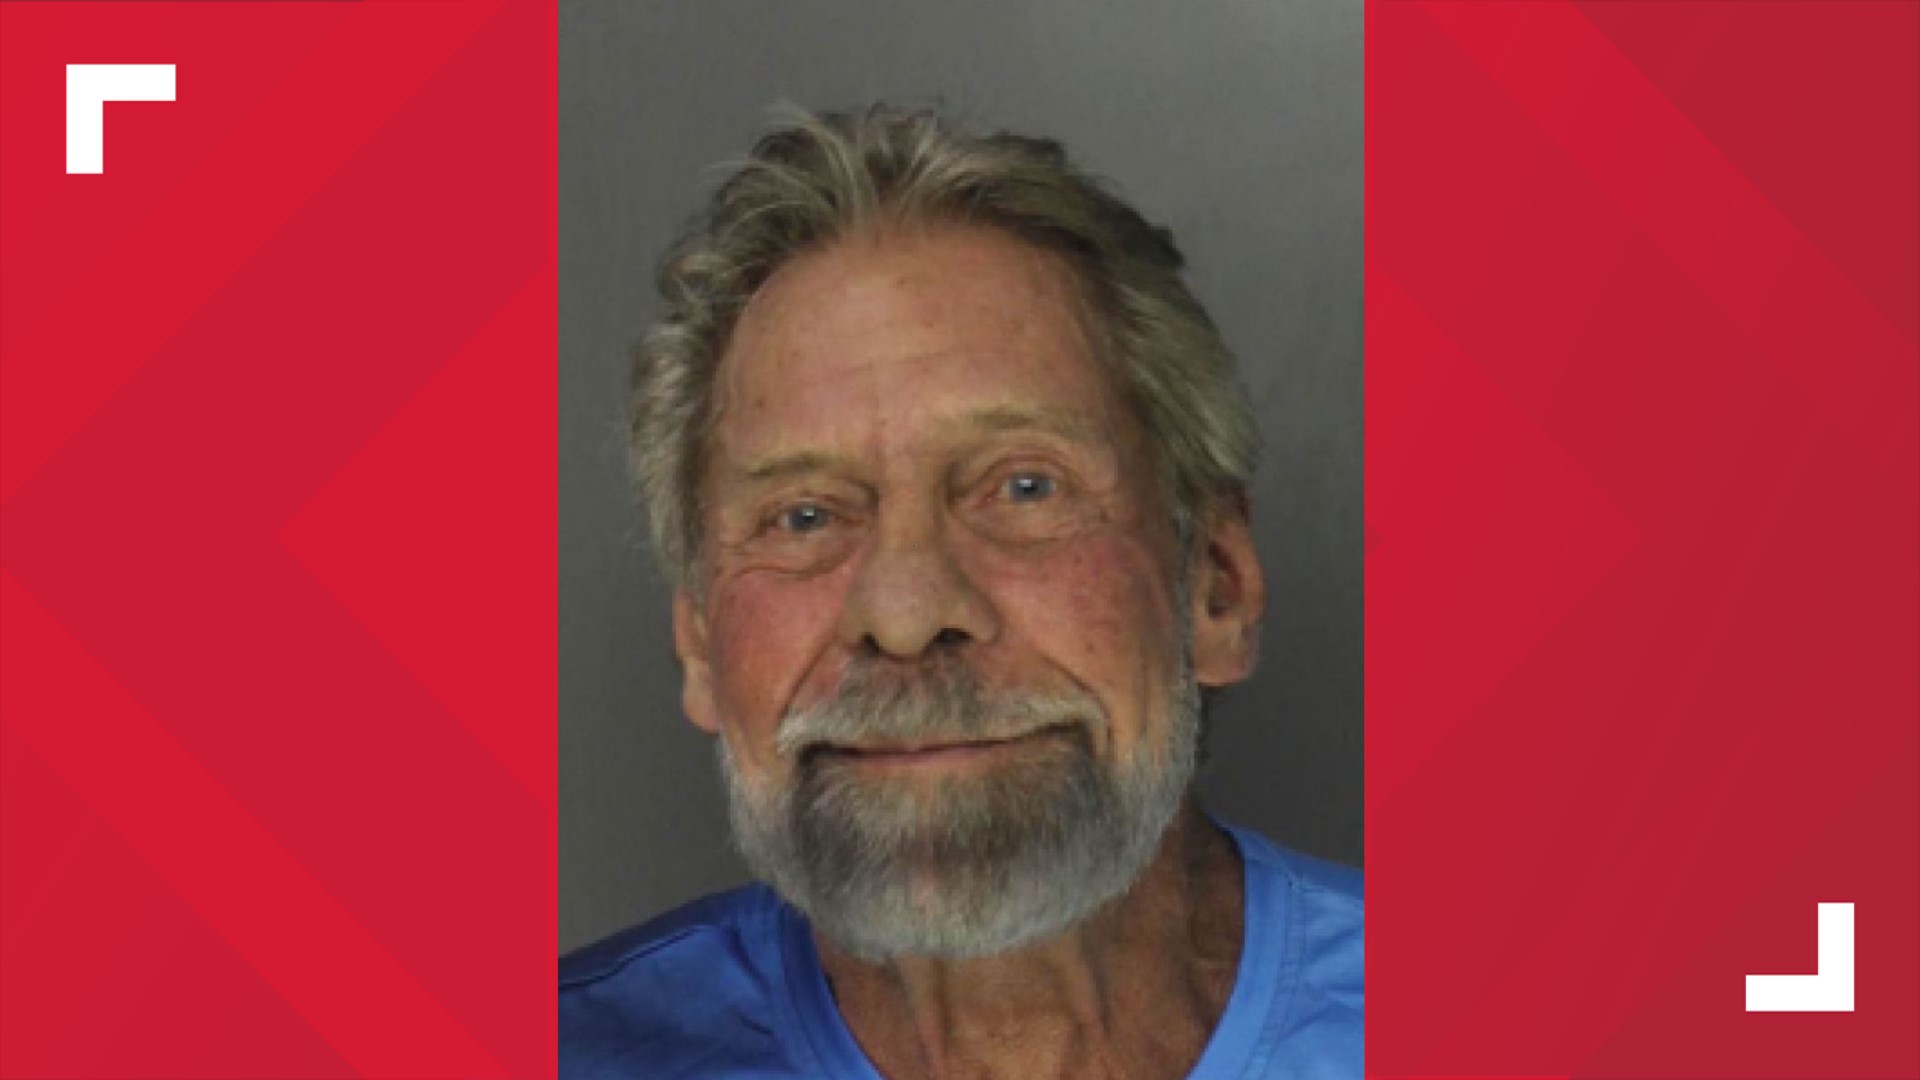 Harrisburg Police arrested a 74-year-old man who brought seven guns to a polling station on 18th Street.